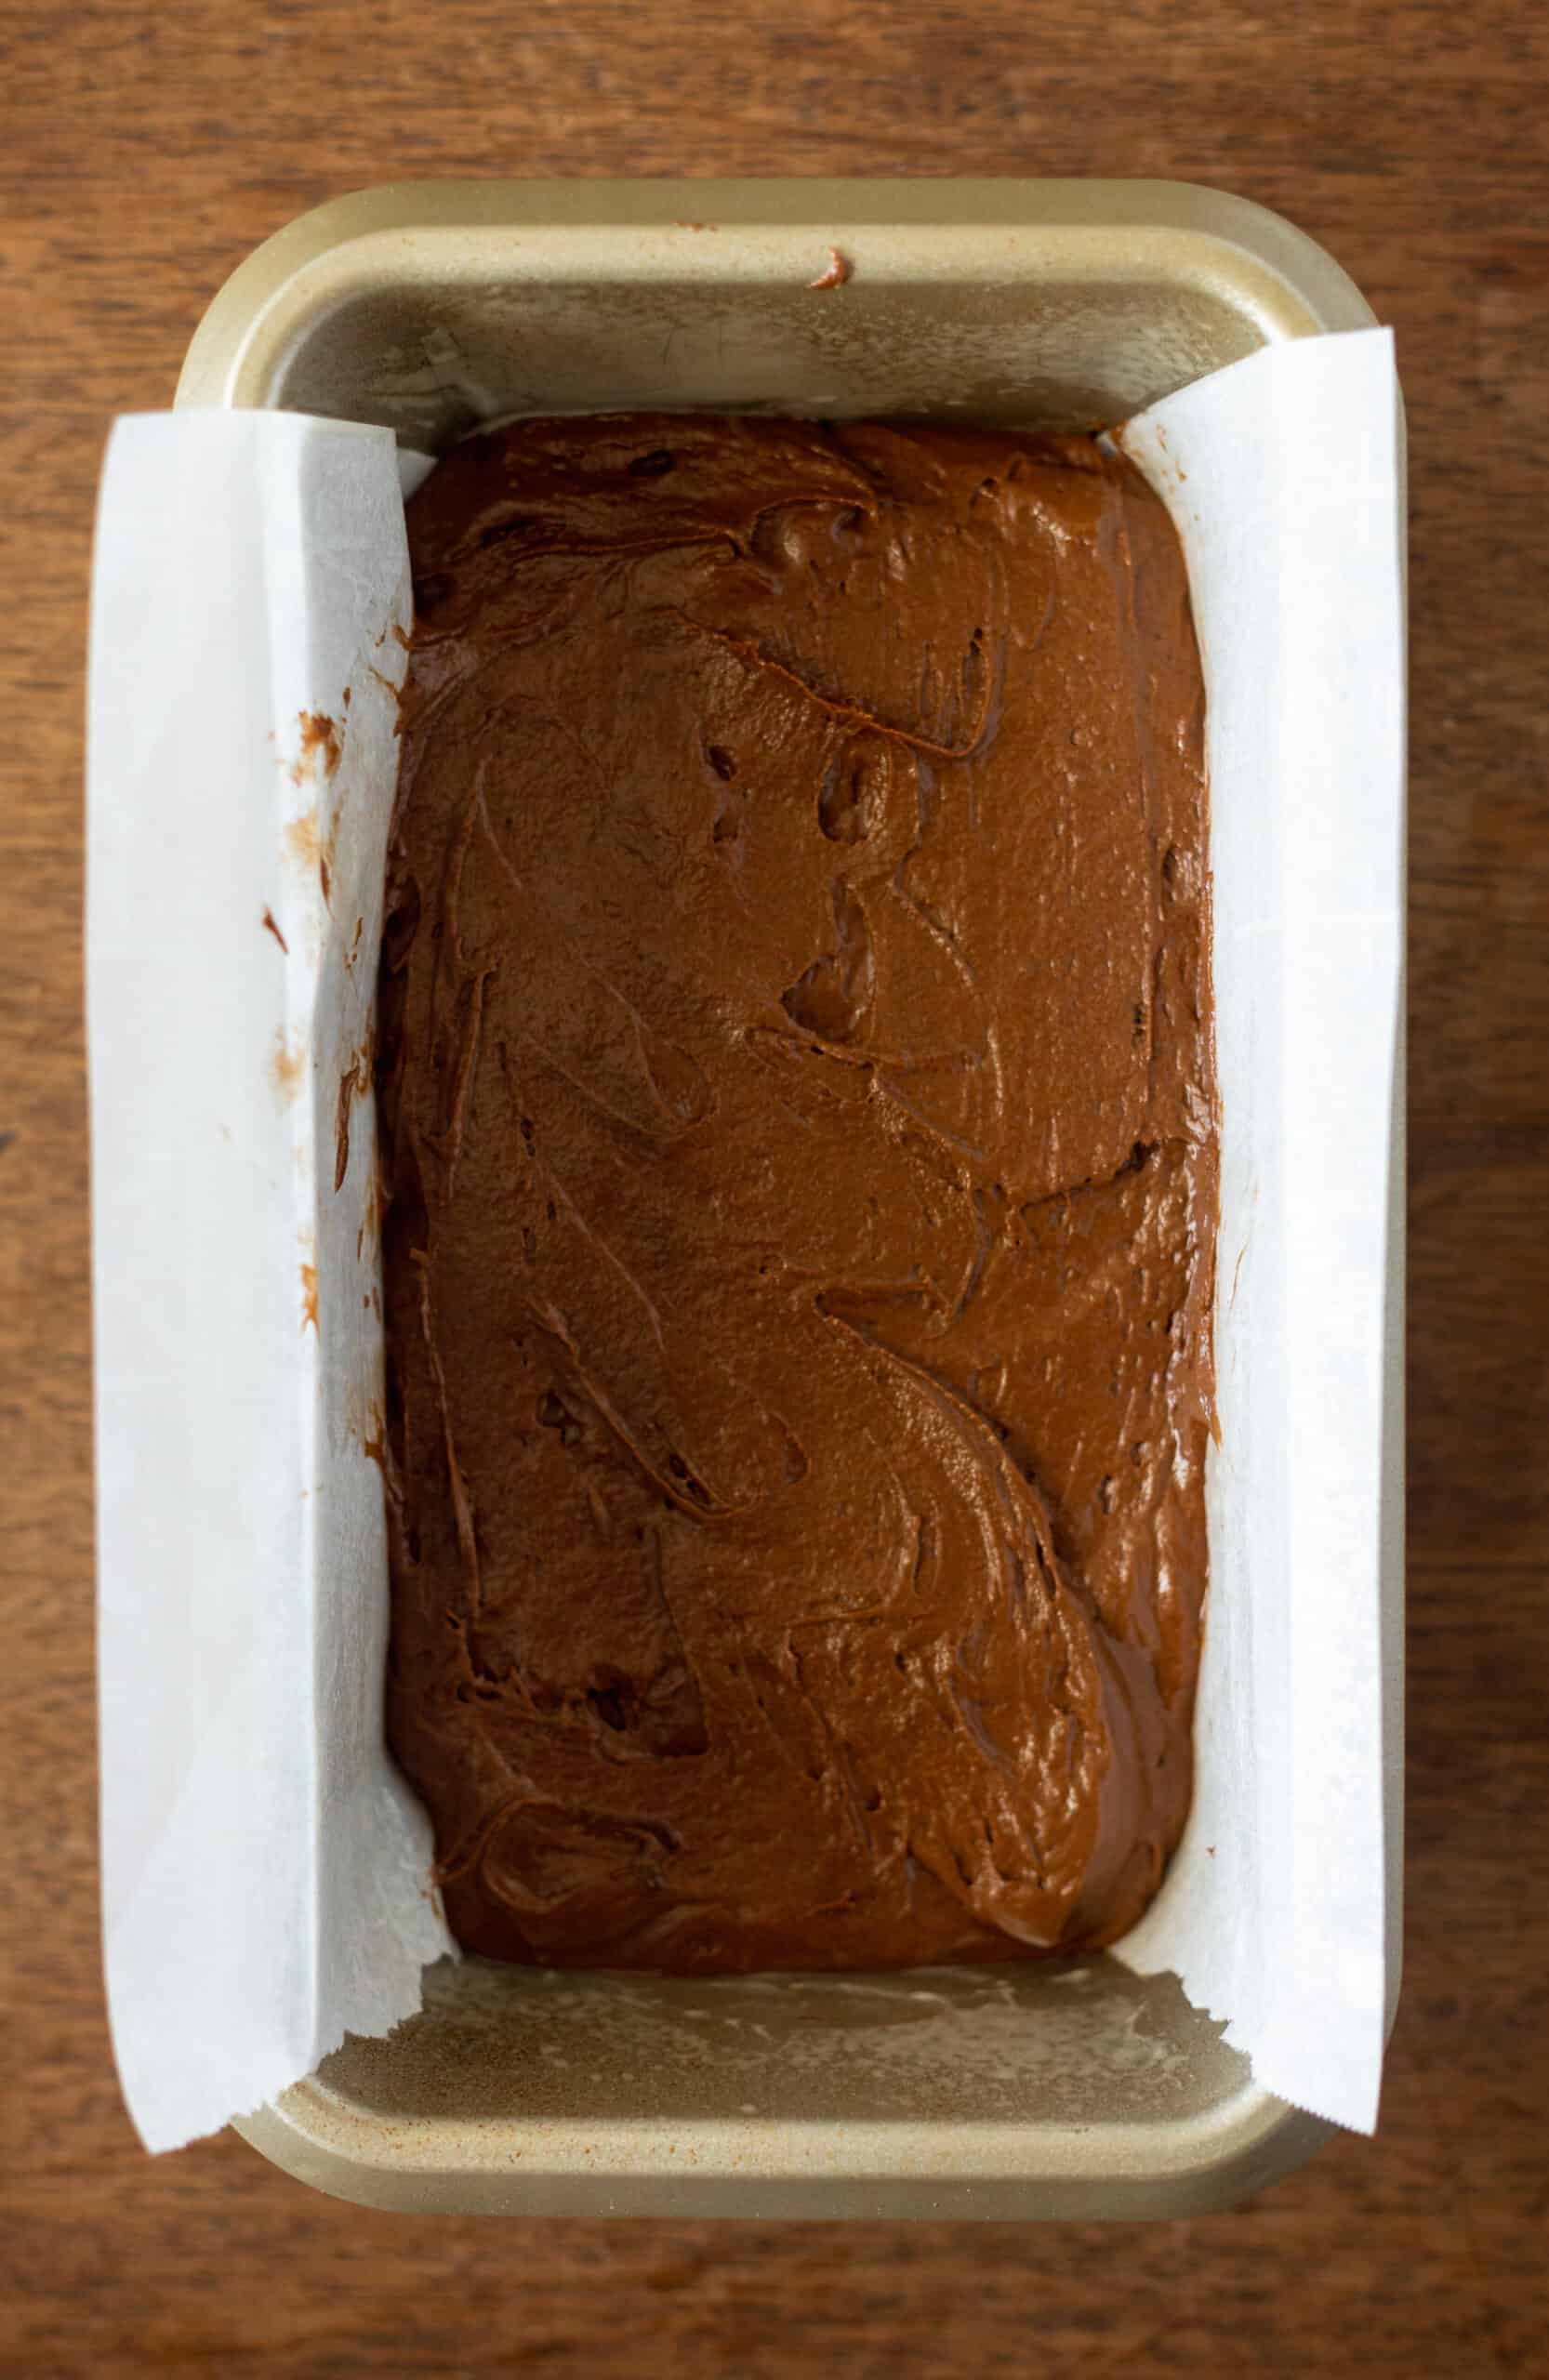 Chocolate cake batter in loaf pan